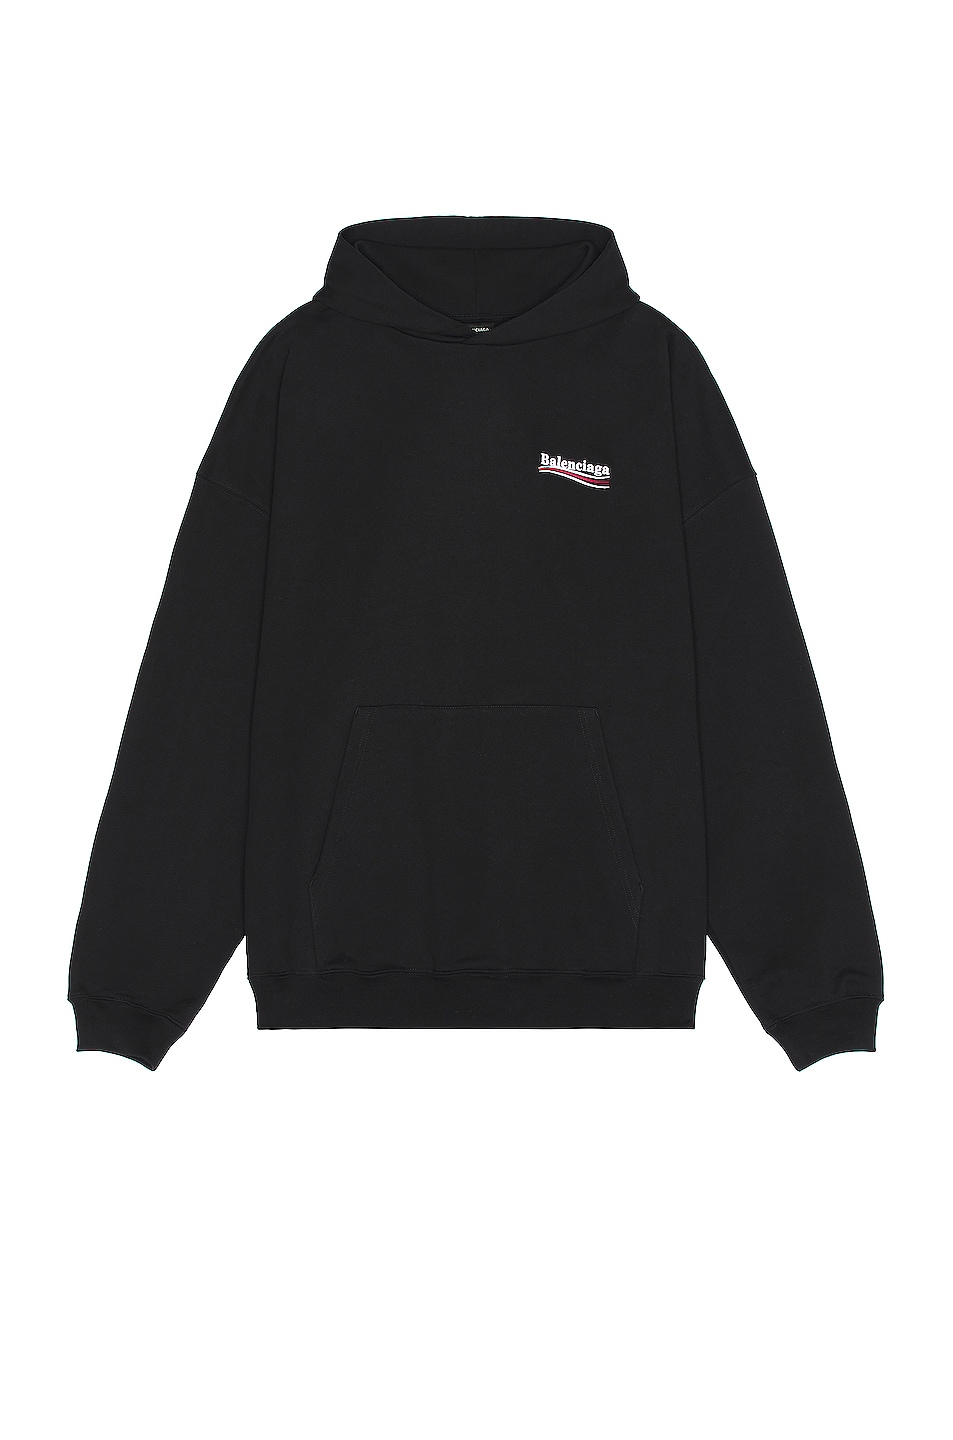 Image 1 of Balenciaga Large Fit Hoodie in Black & White